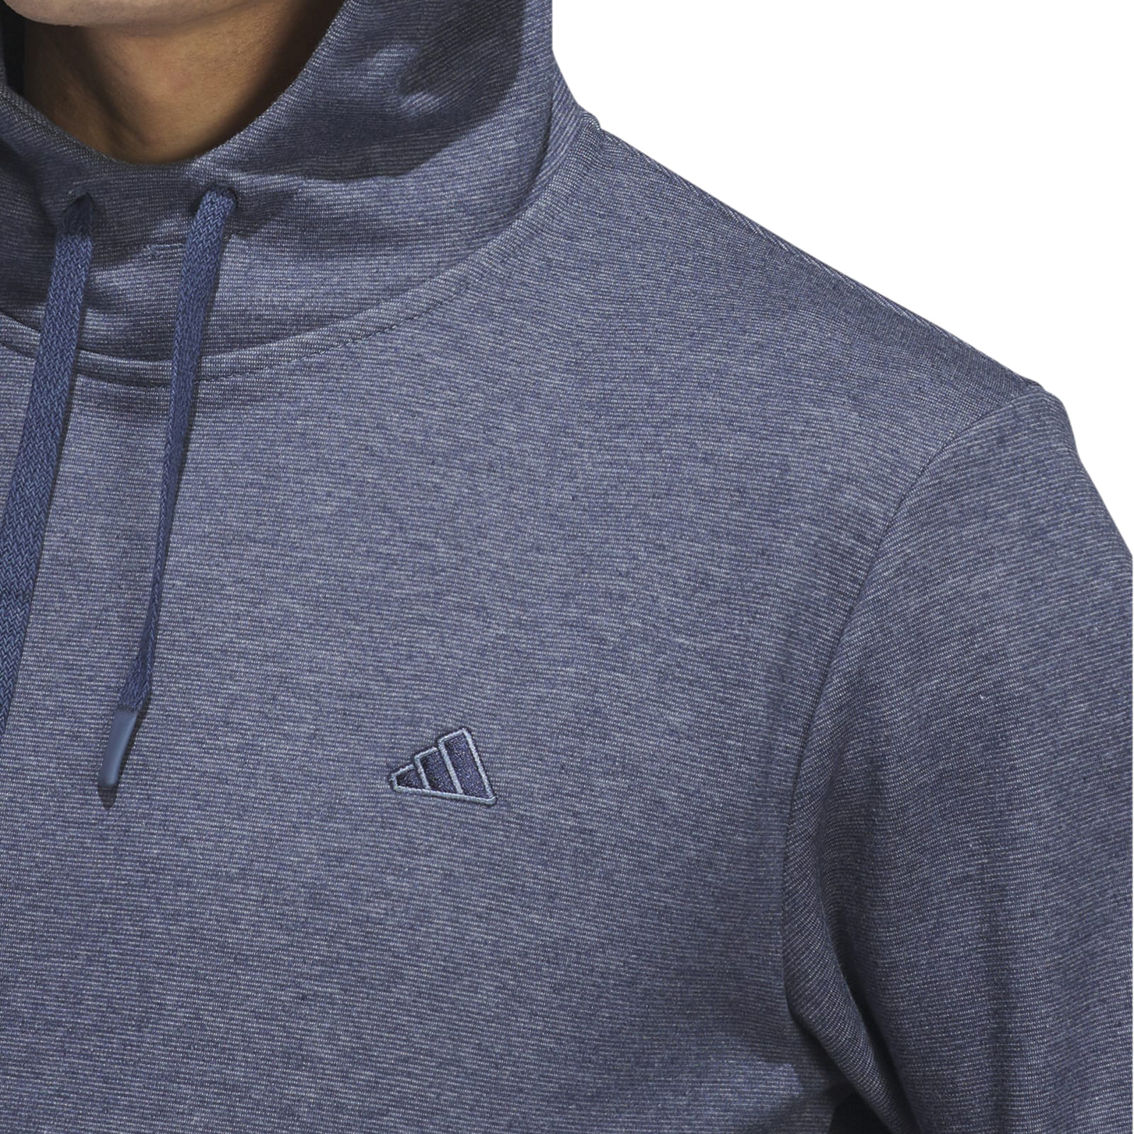 adidas Go-To Hoodie - Image 4 of 6